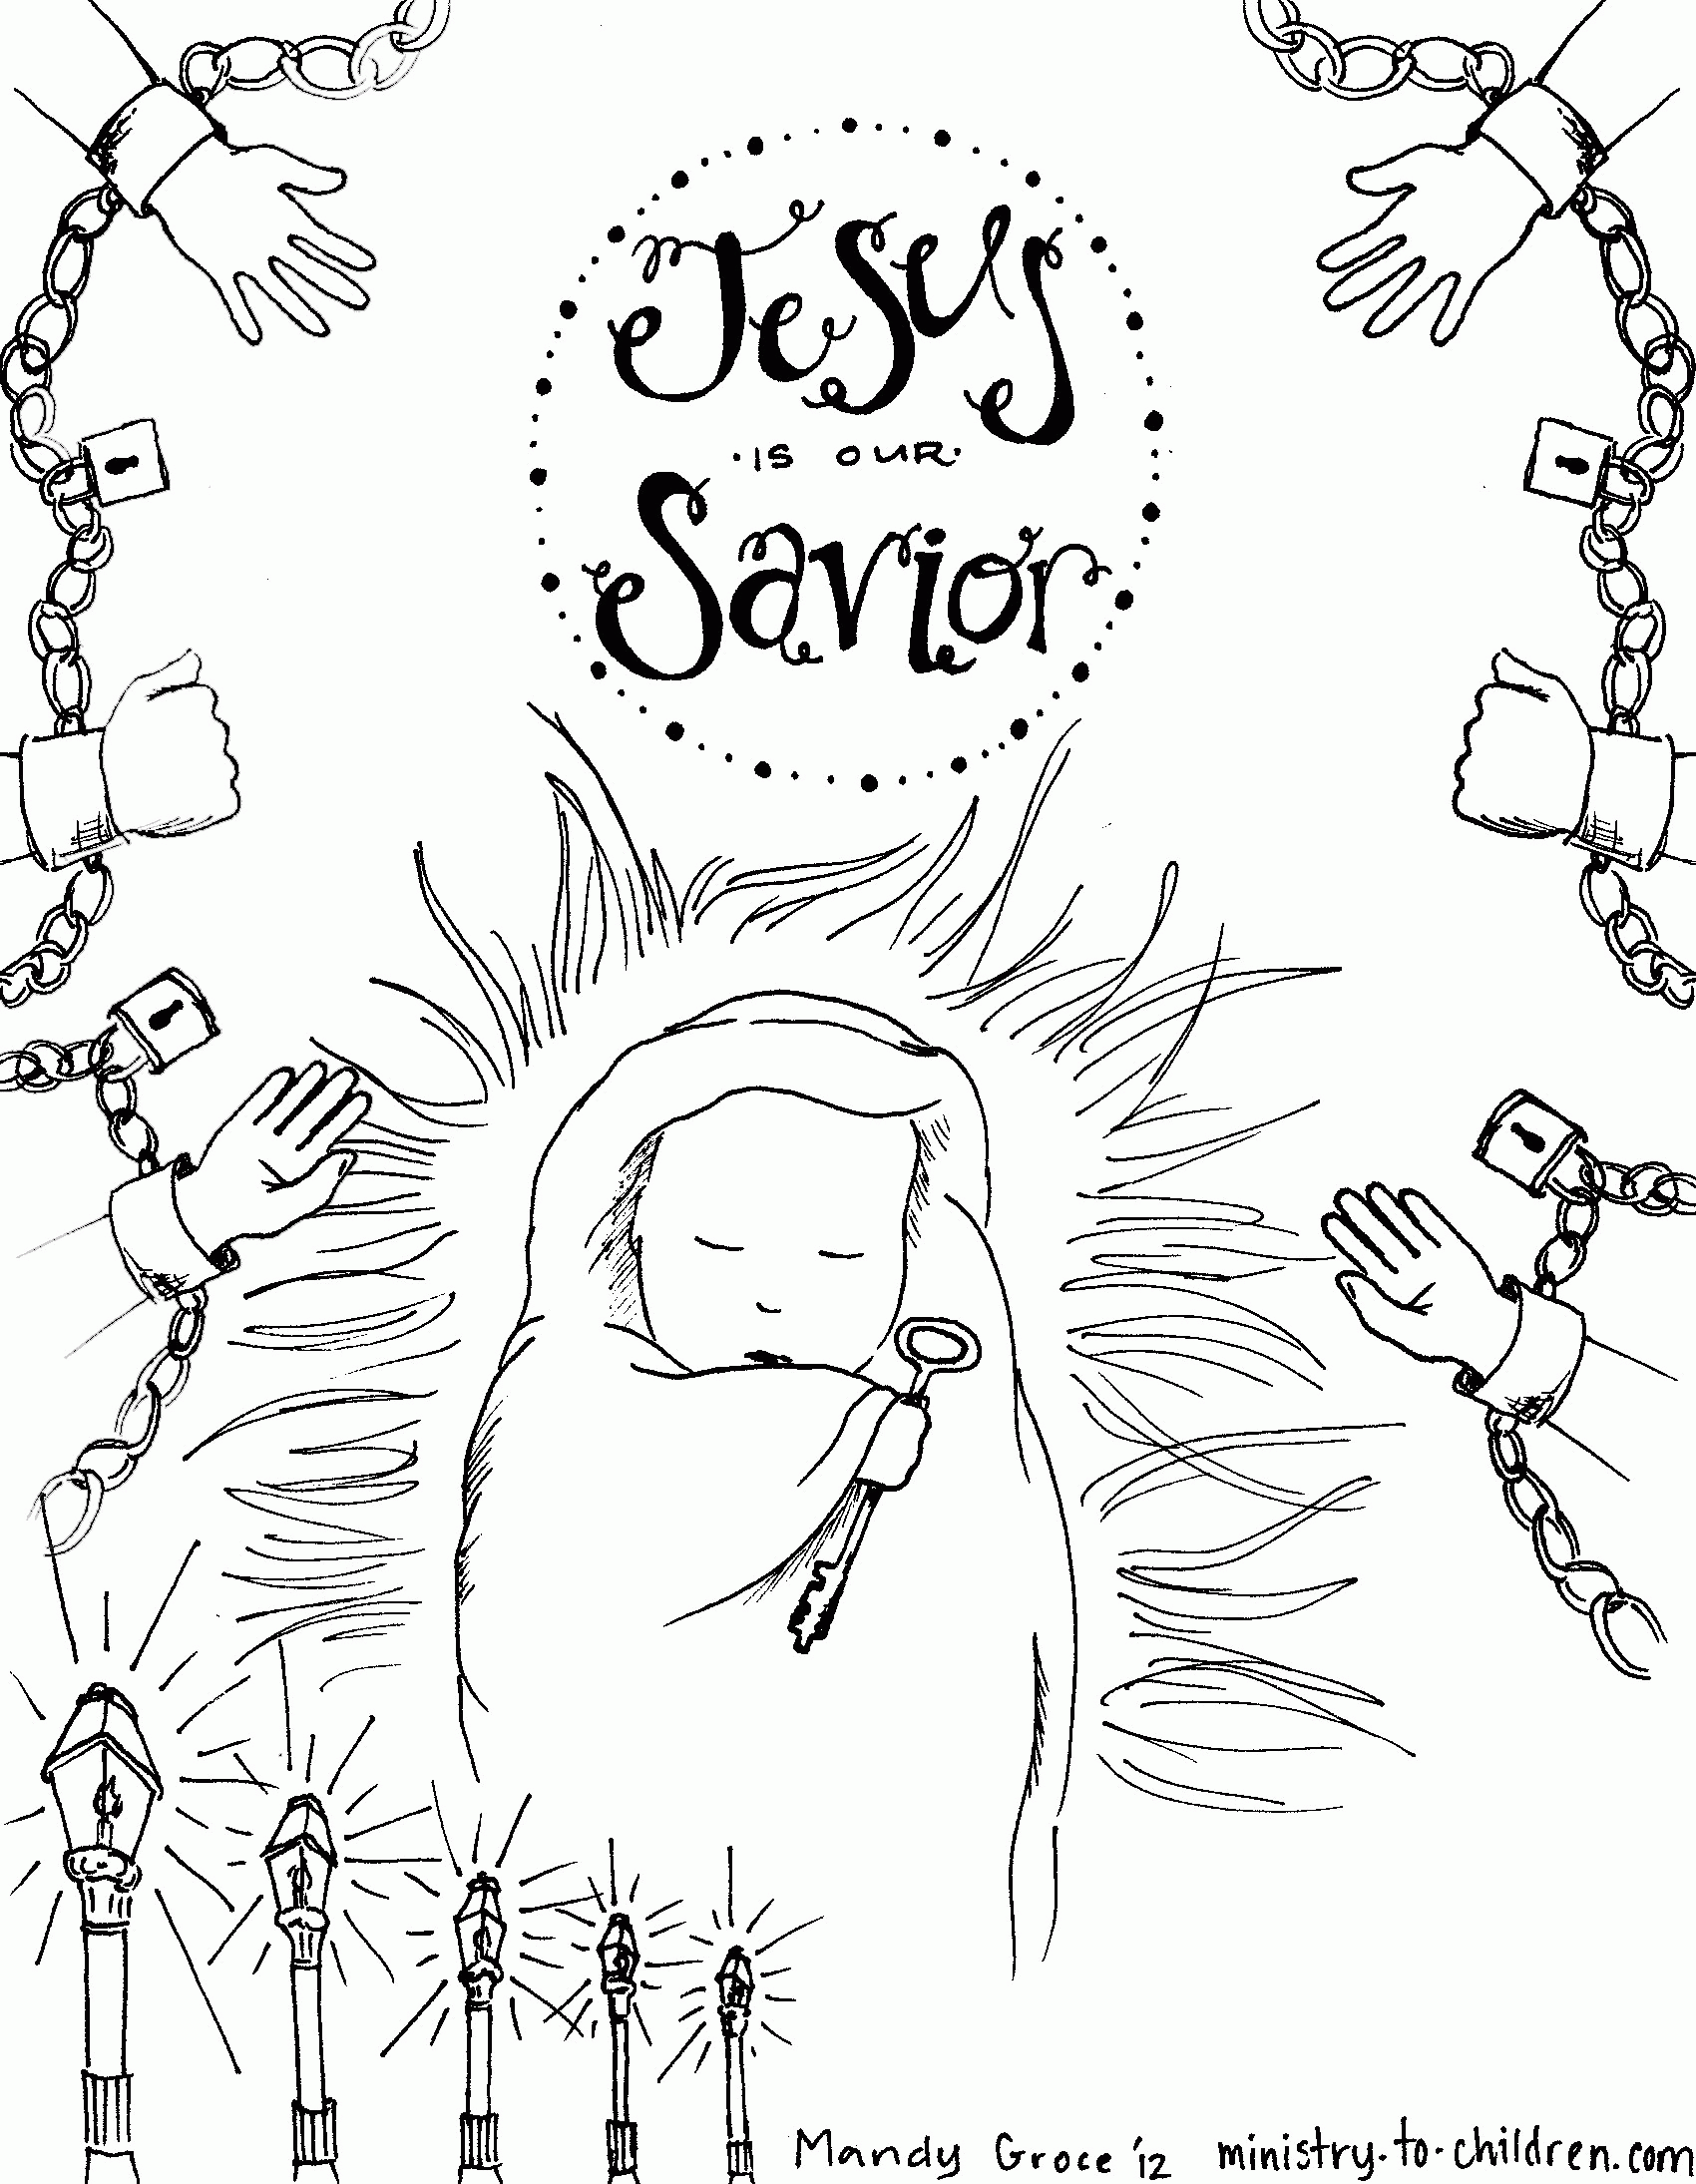 Baby Jesus" is our Savior Coloring Page for Advent